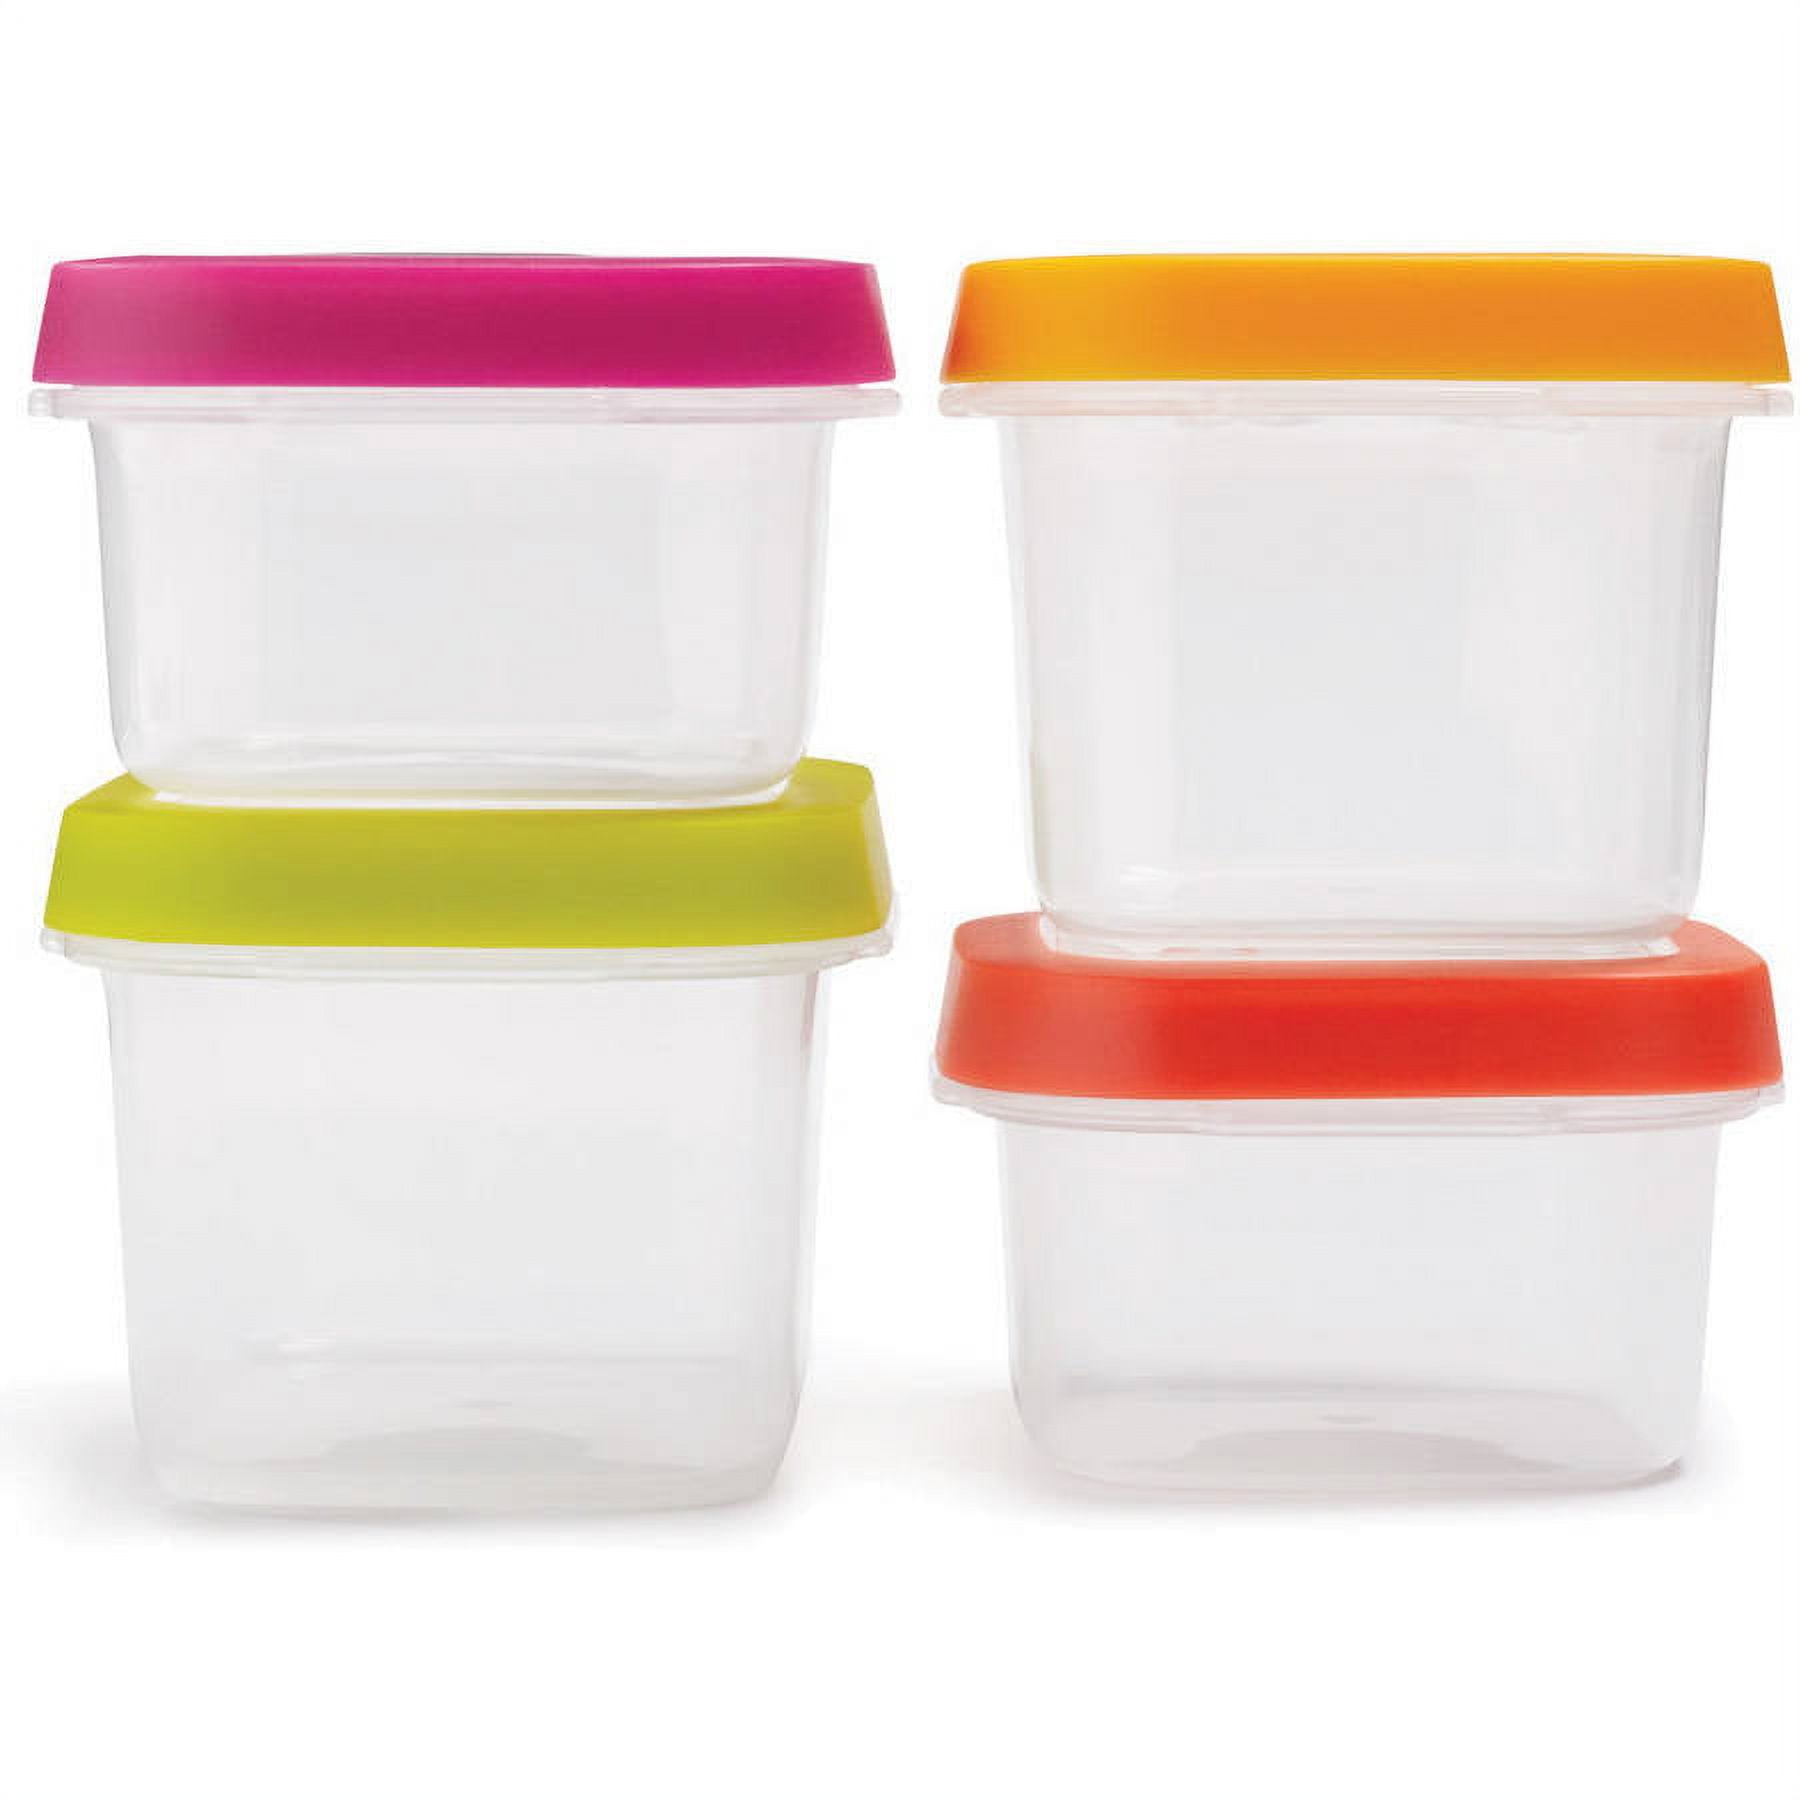 Rubbermaid Balance Meal Kit Containers - 11 PK